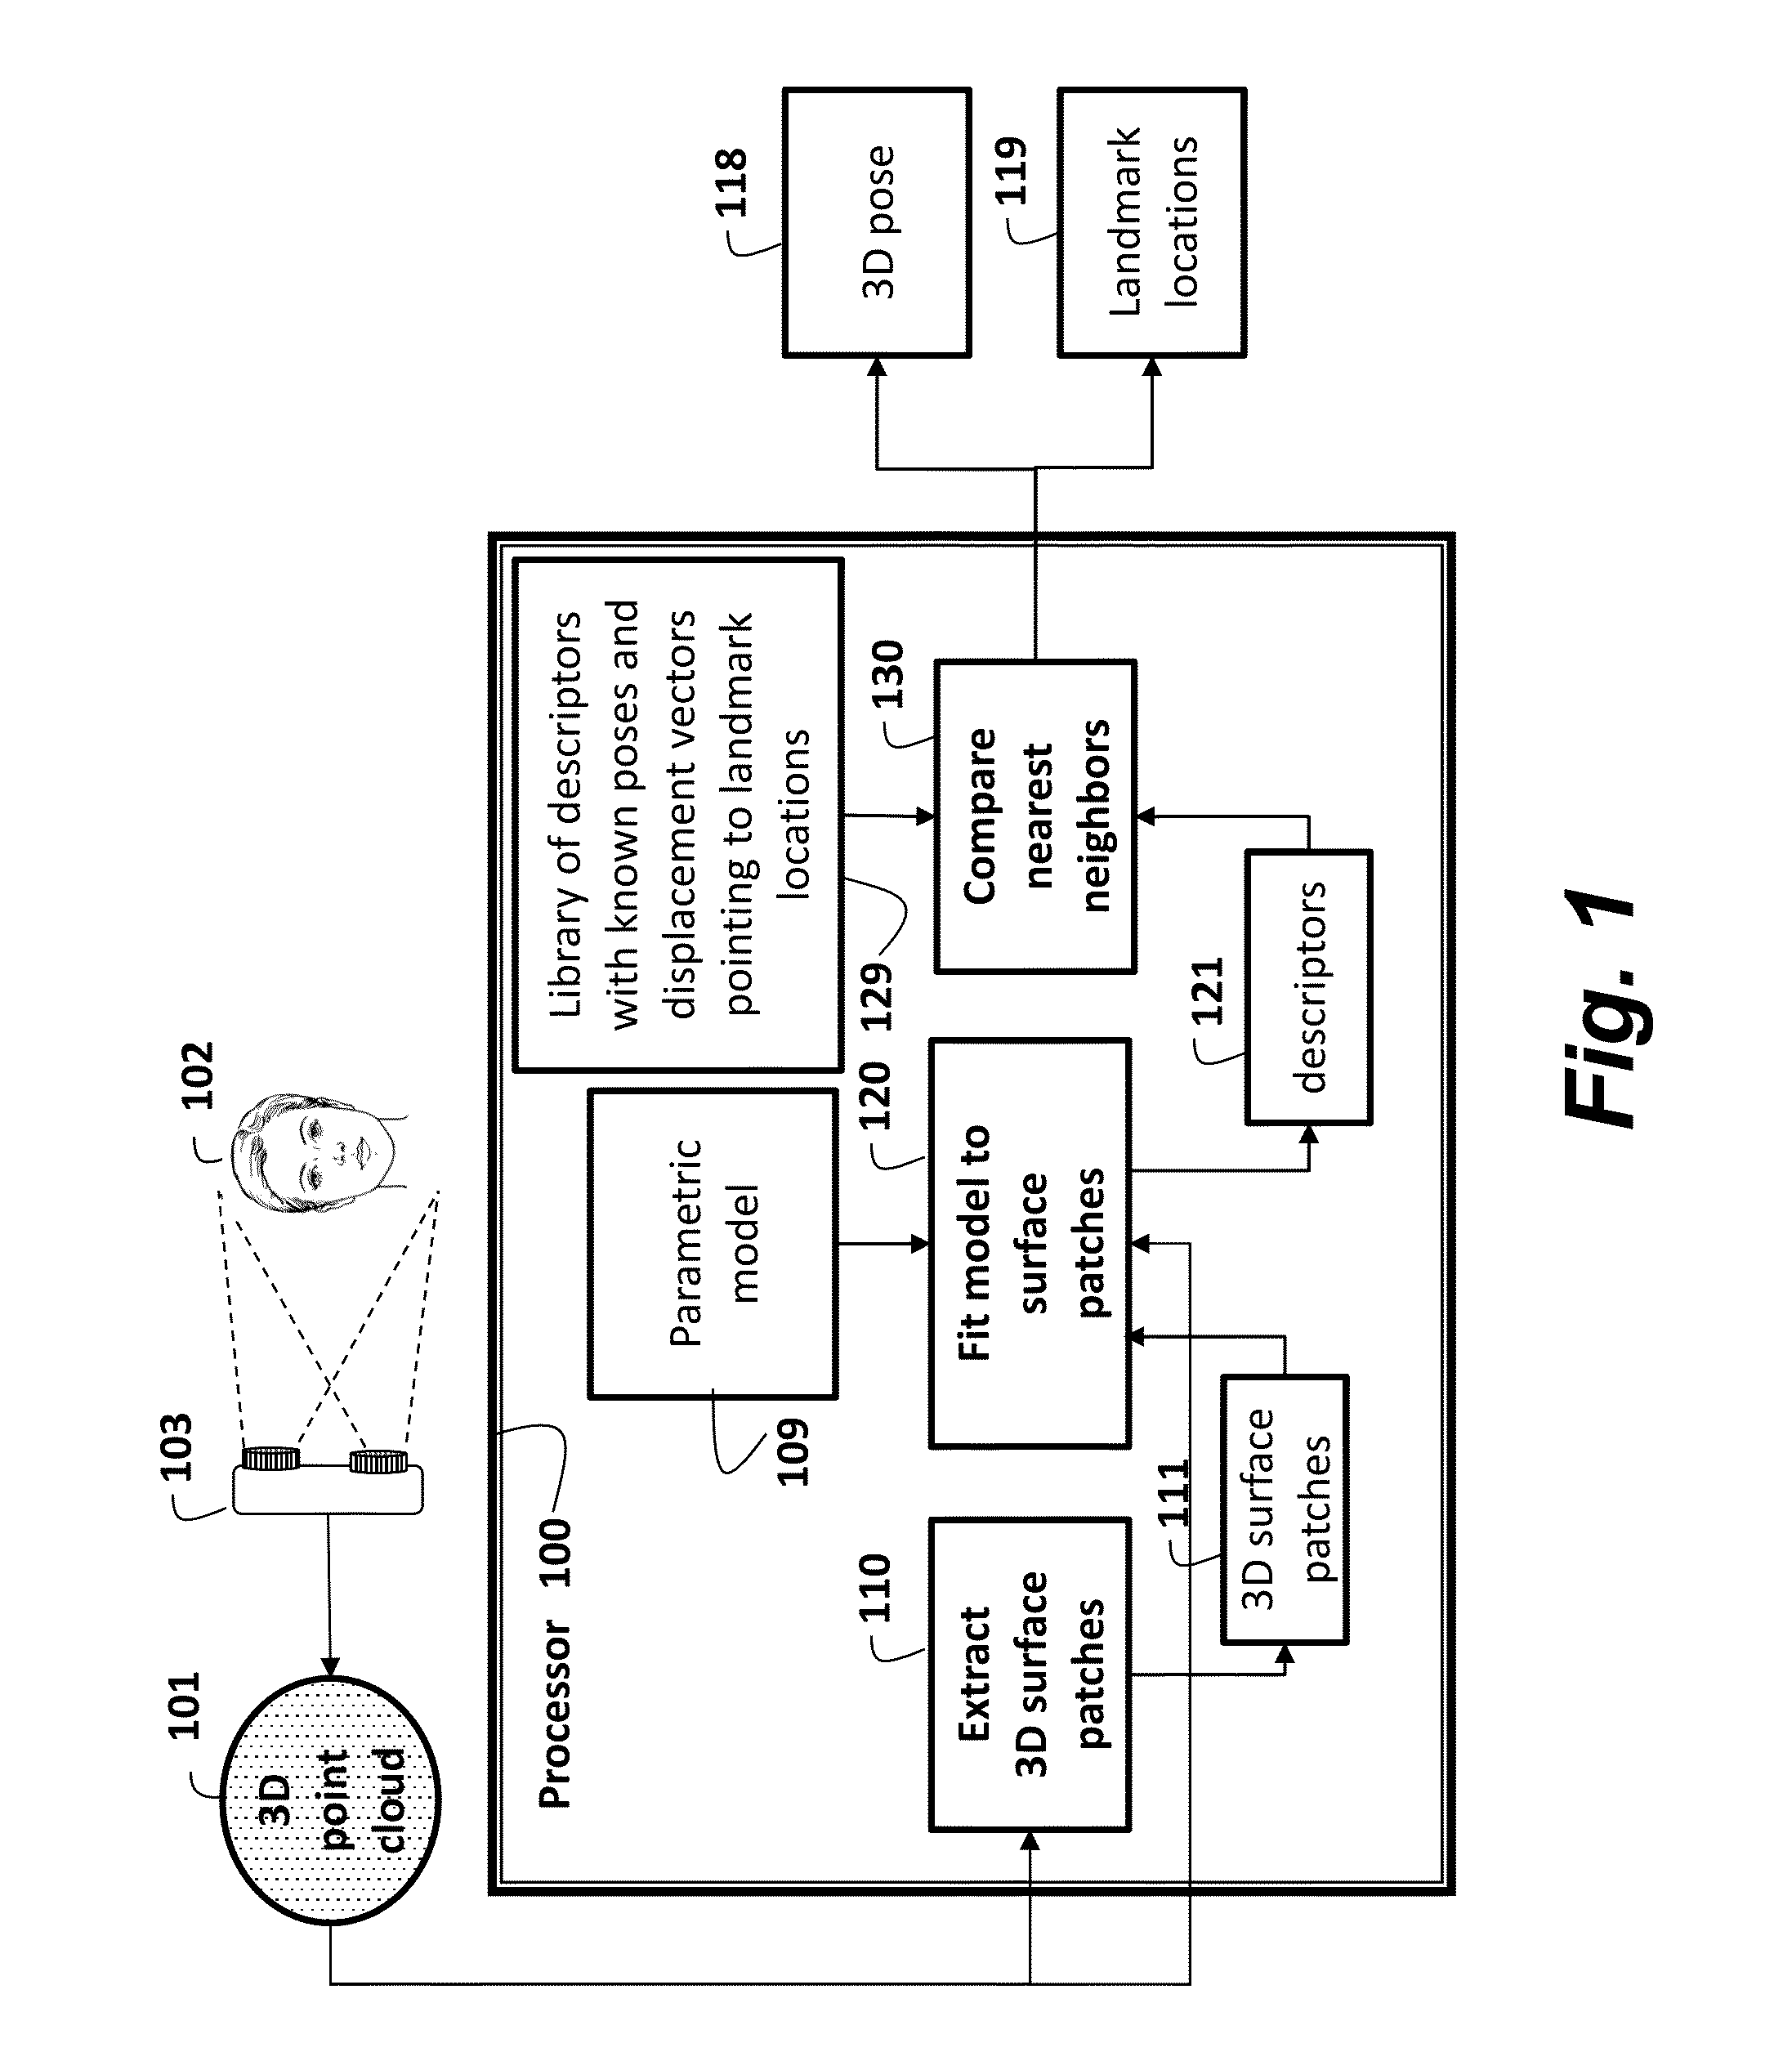 Method and System for Determining 3D Object Poses and Landmark Points using Surface Patches